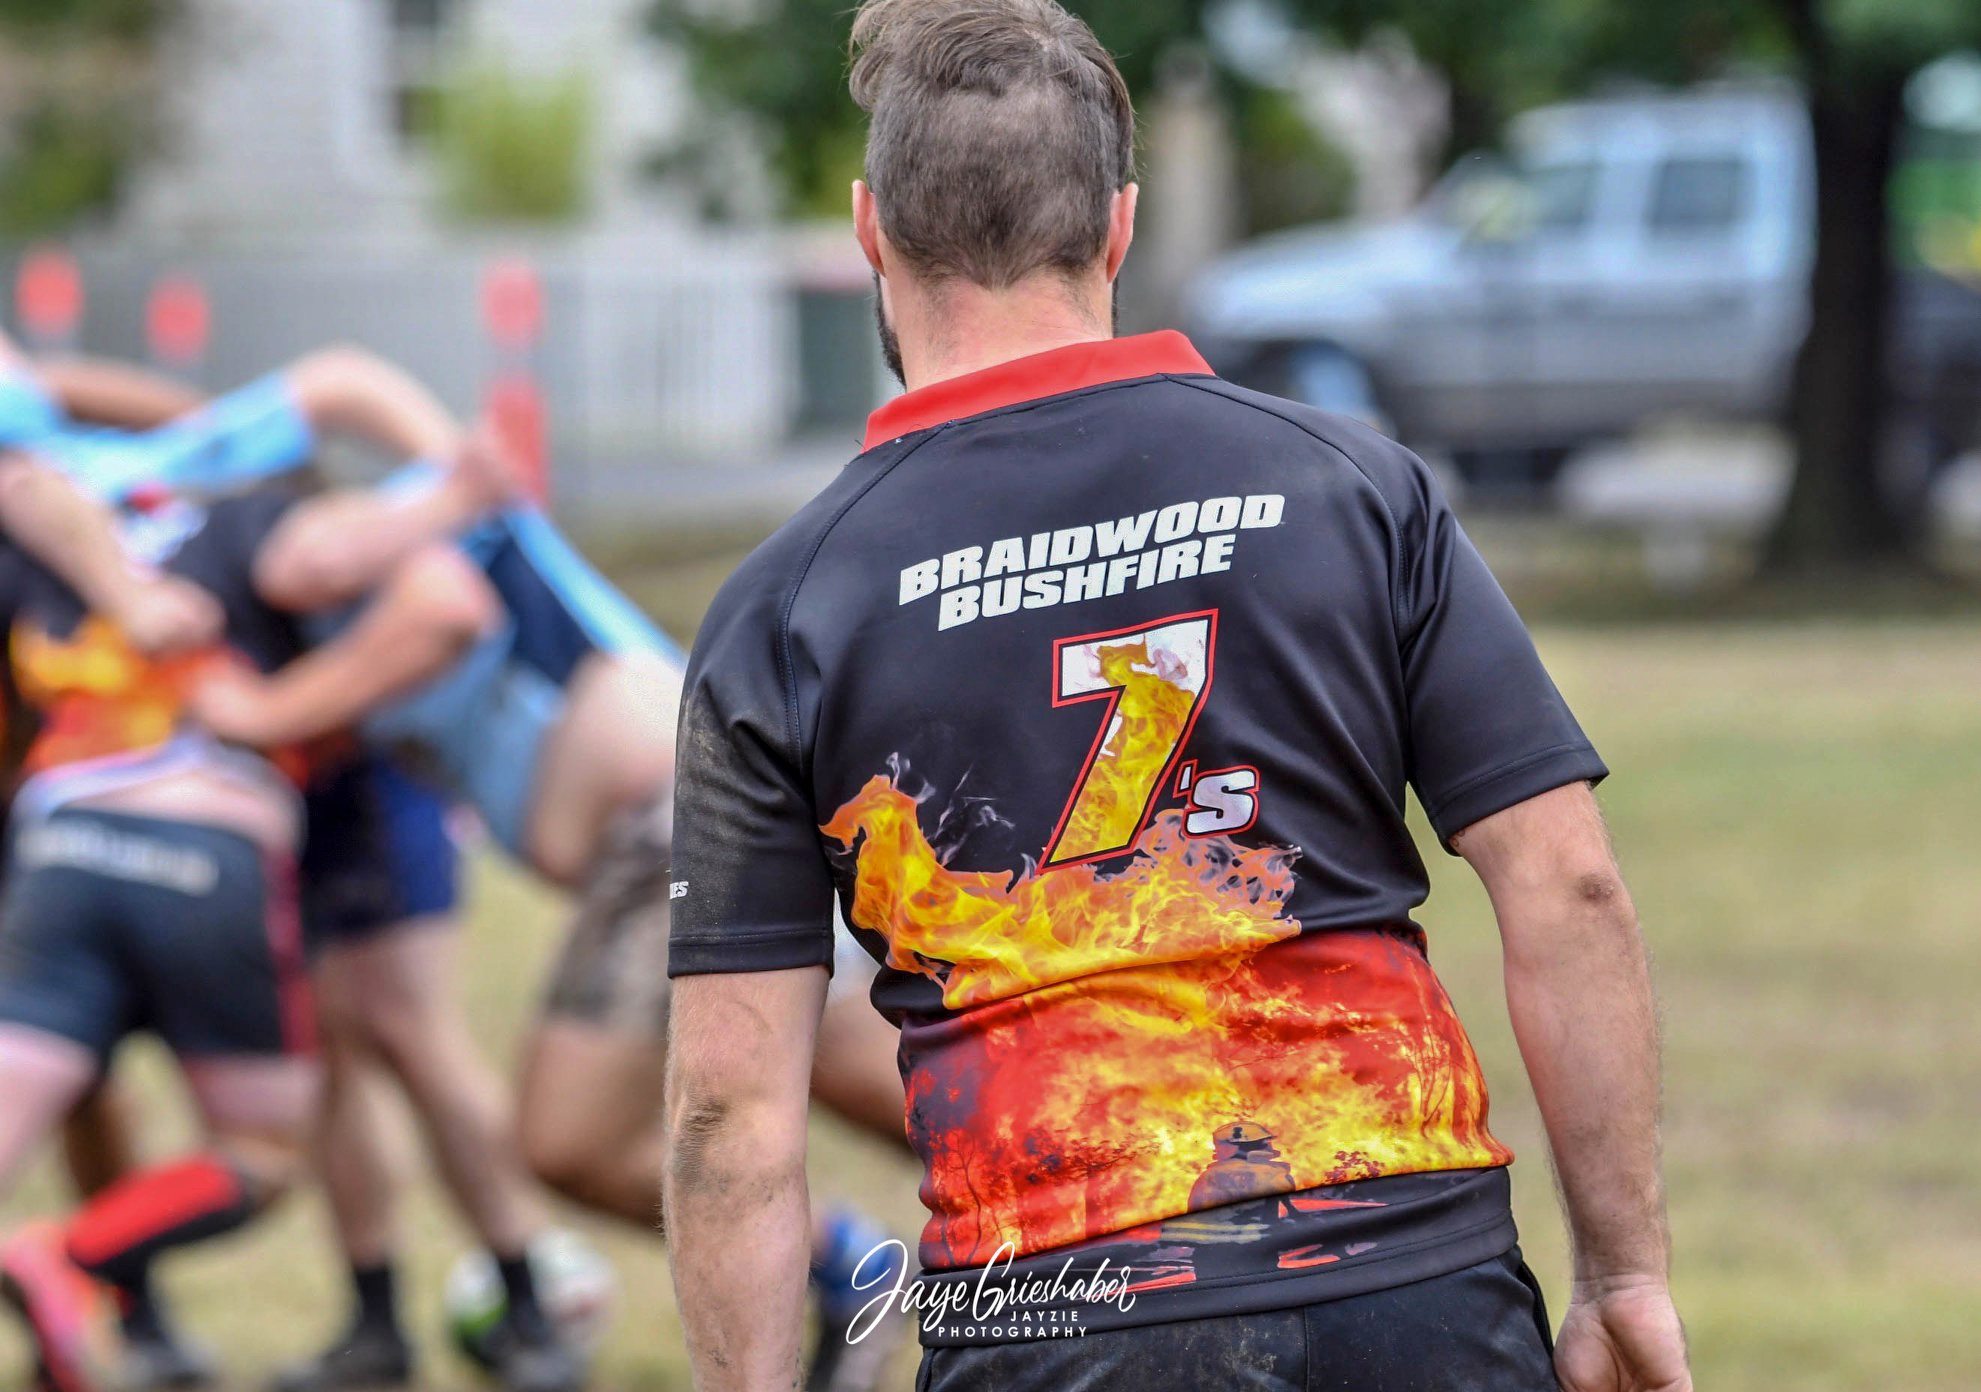 The Braidwood Bushfire 7s raises spirits and funds for bushfire-affected areas